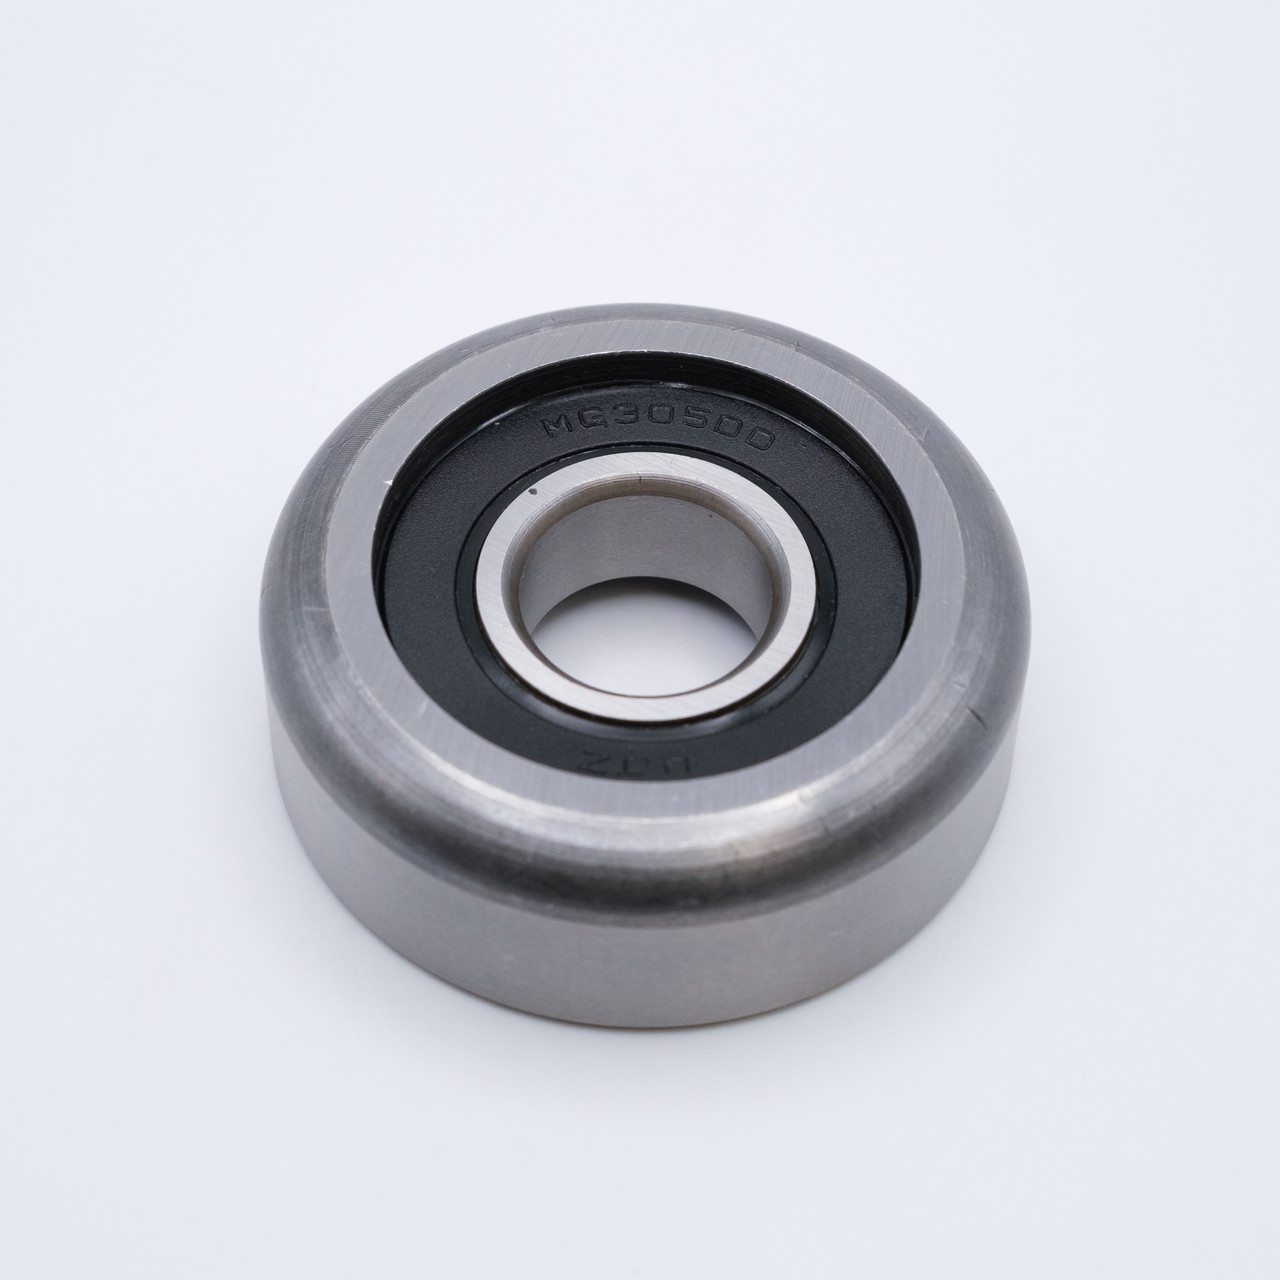 MG305-2RS-1 Mast Guide Ball Bearing 25mm Bore Top View